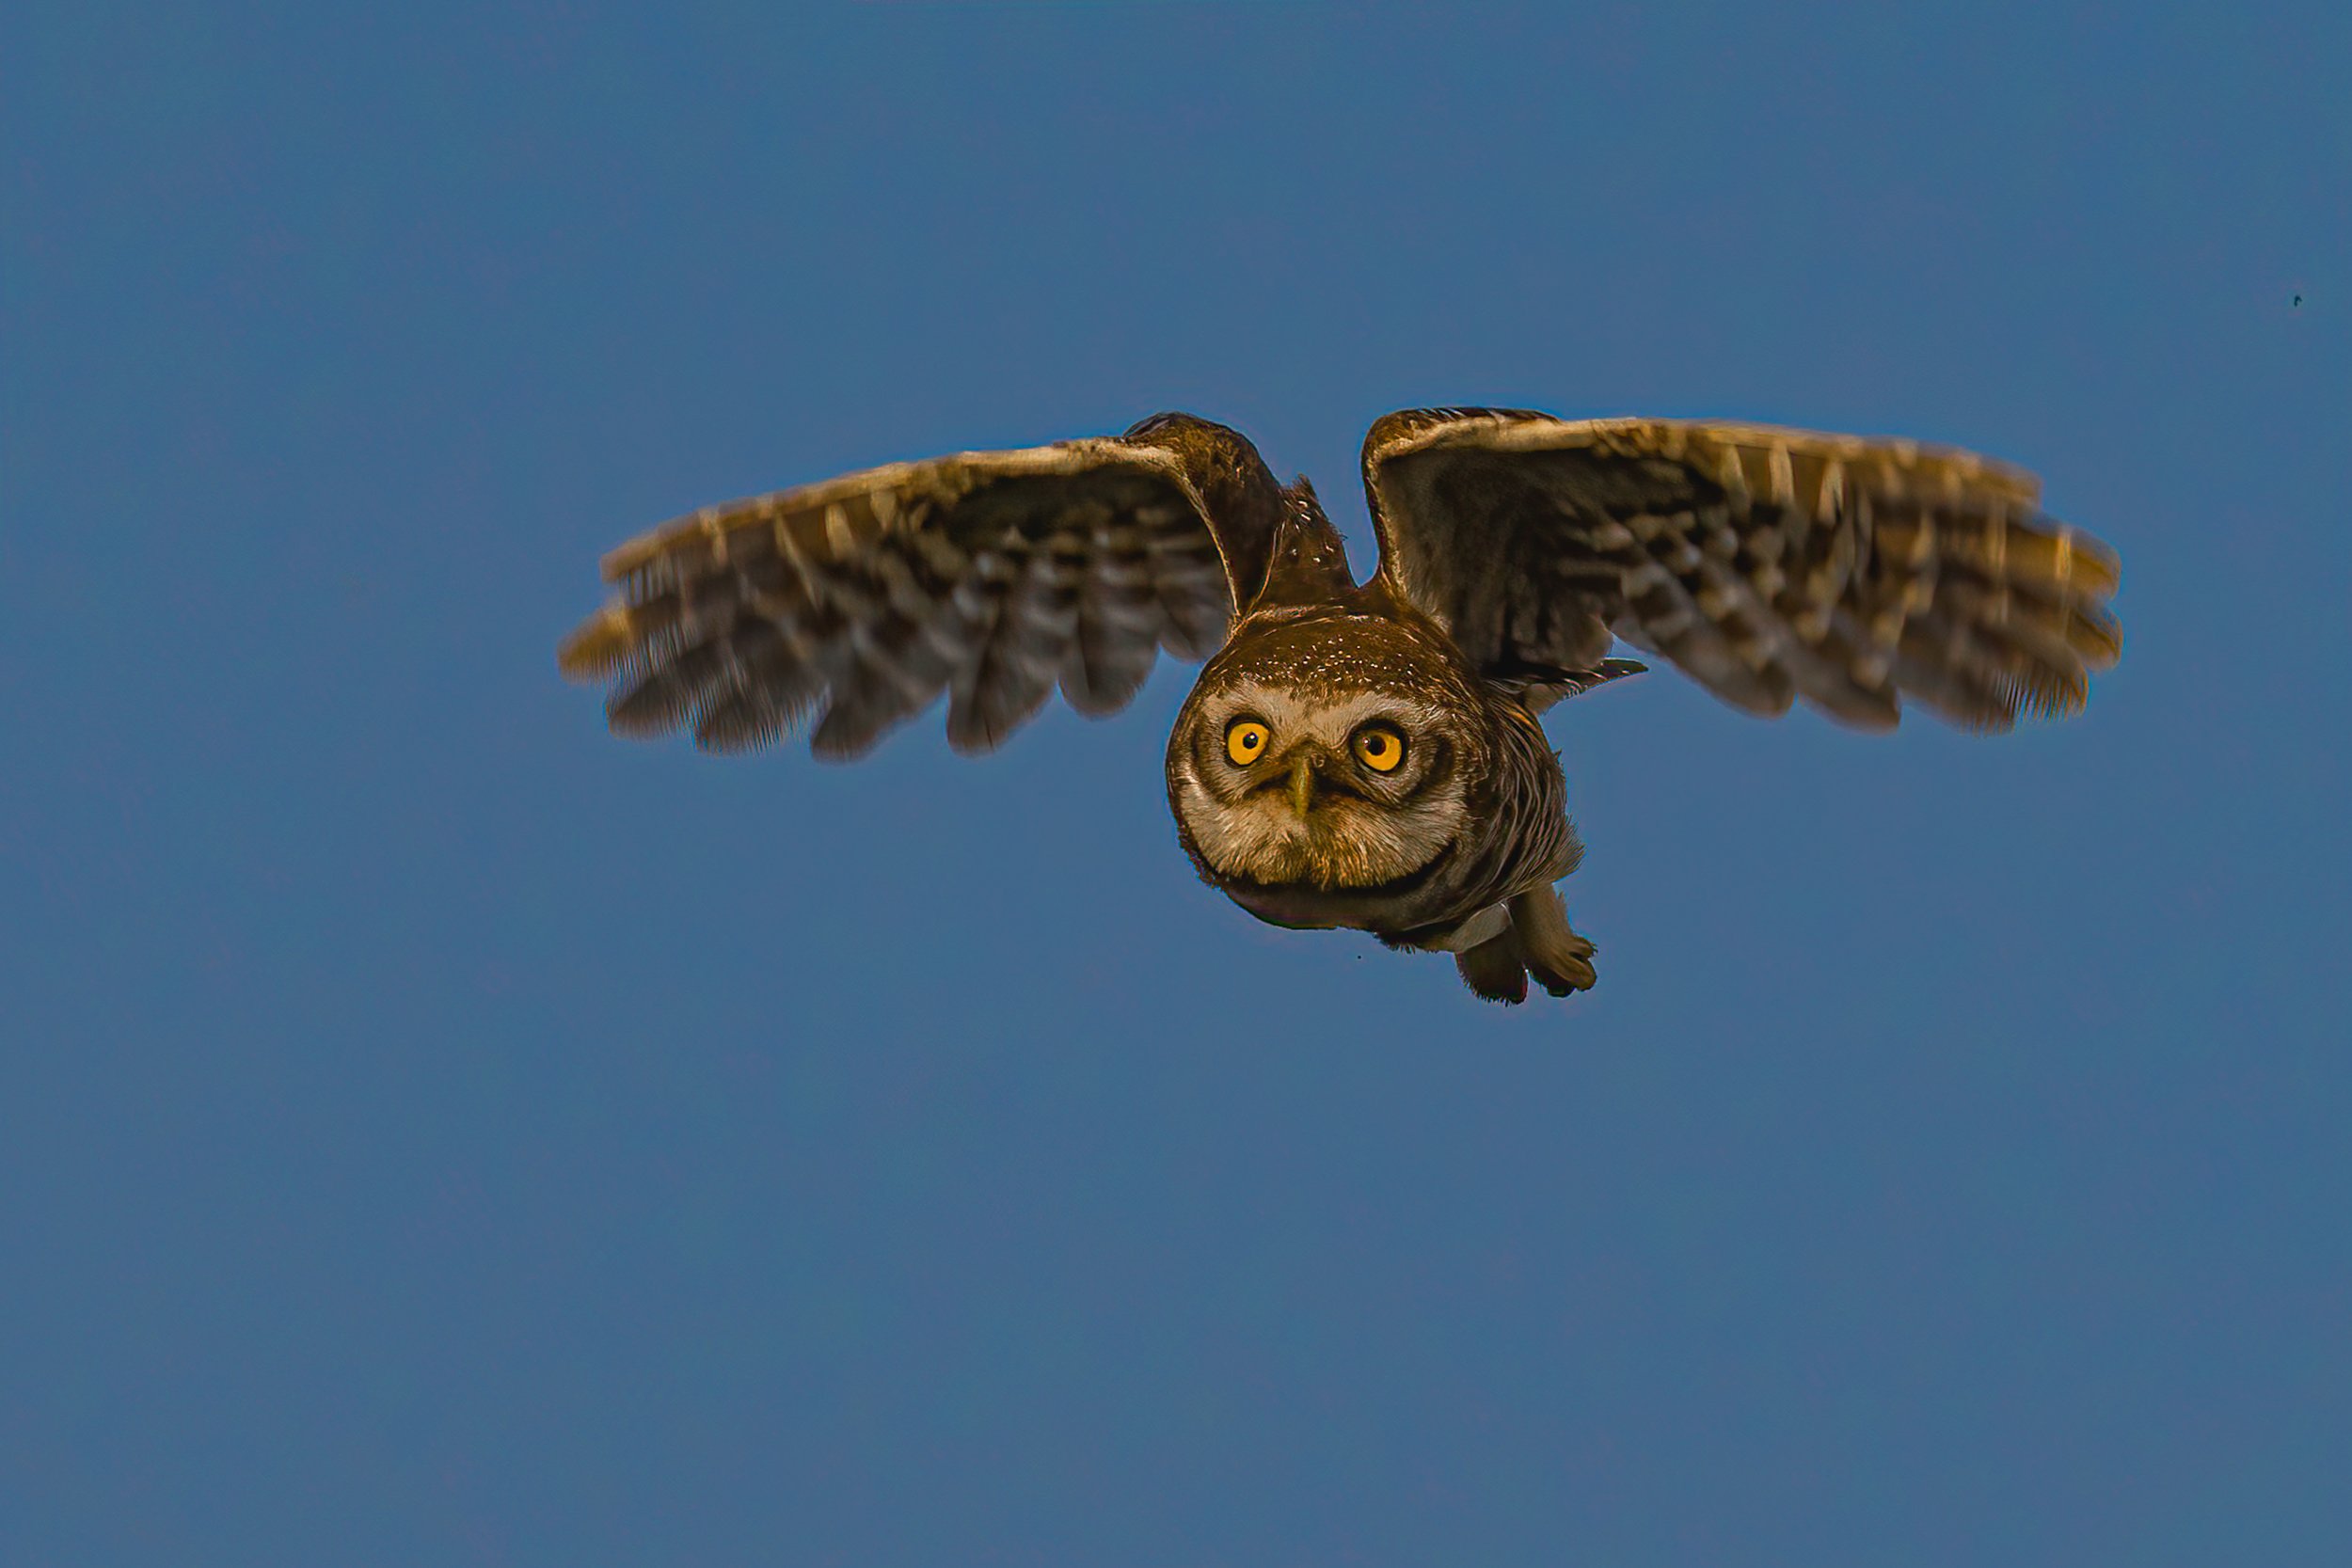 spotted, owl, Vipul Saxena